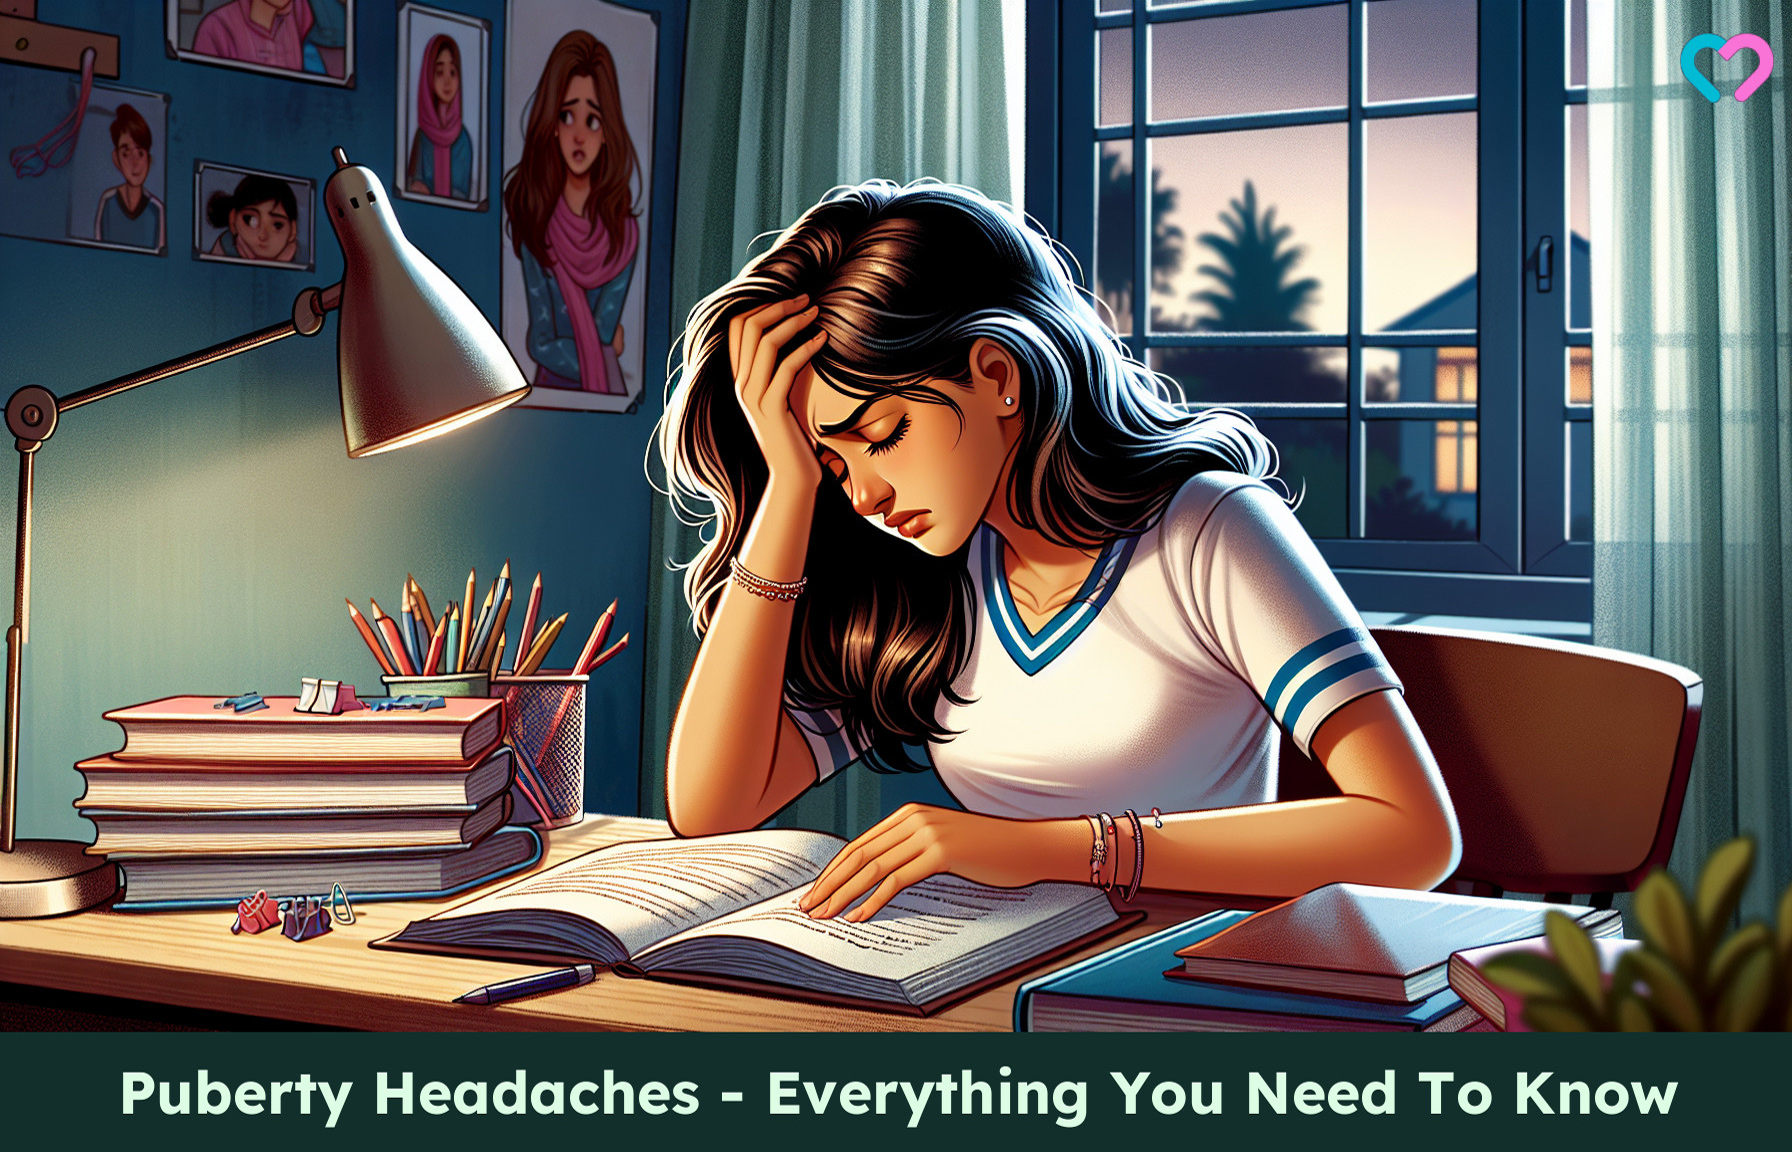 Puberty Headaches - Everything You Need To Know_illustration